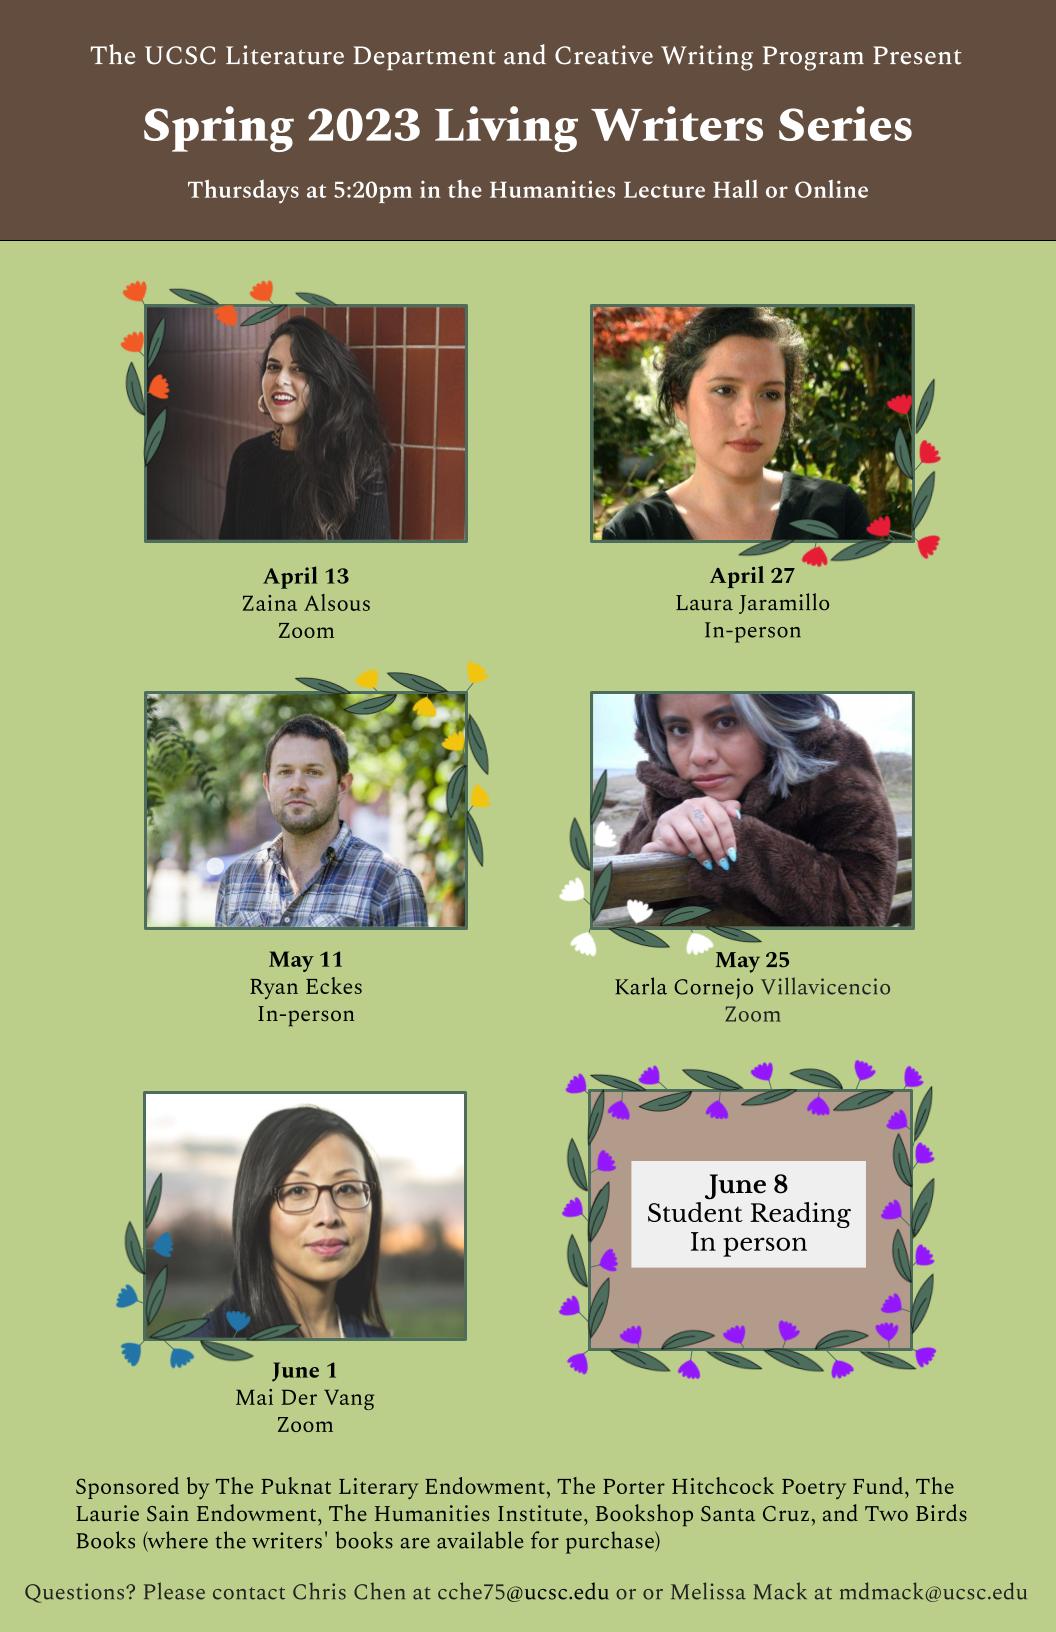 The UCSC Literature Department and Creative Writing Program Present the Spring 2023 Living Writers Series.